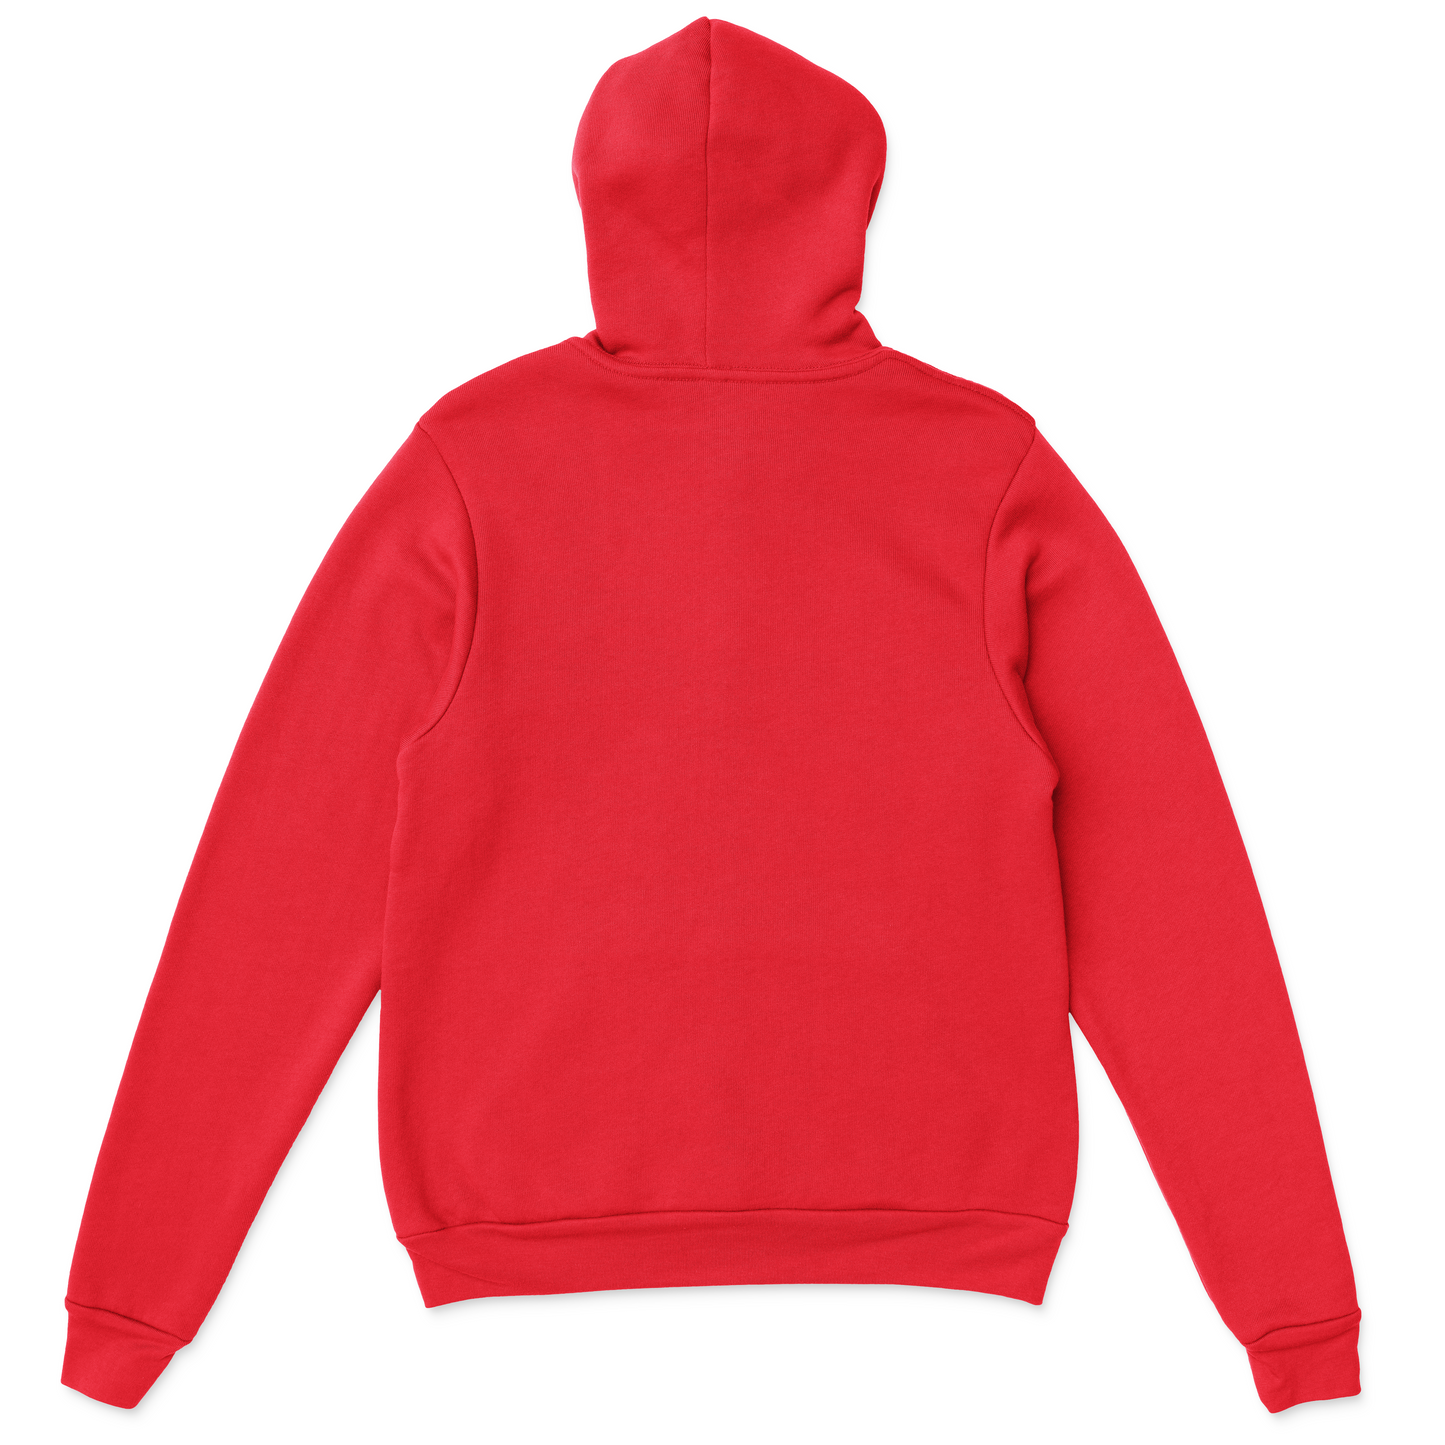 I ❤️ LHM - Children's Hoodie, Red